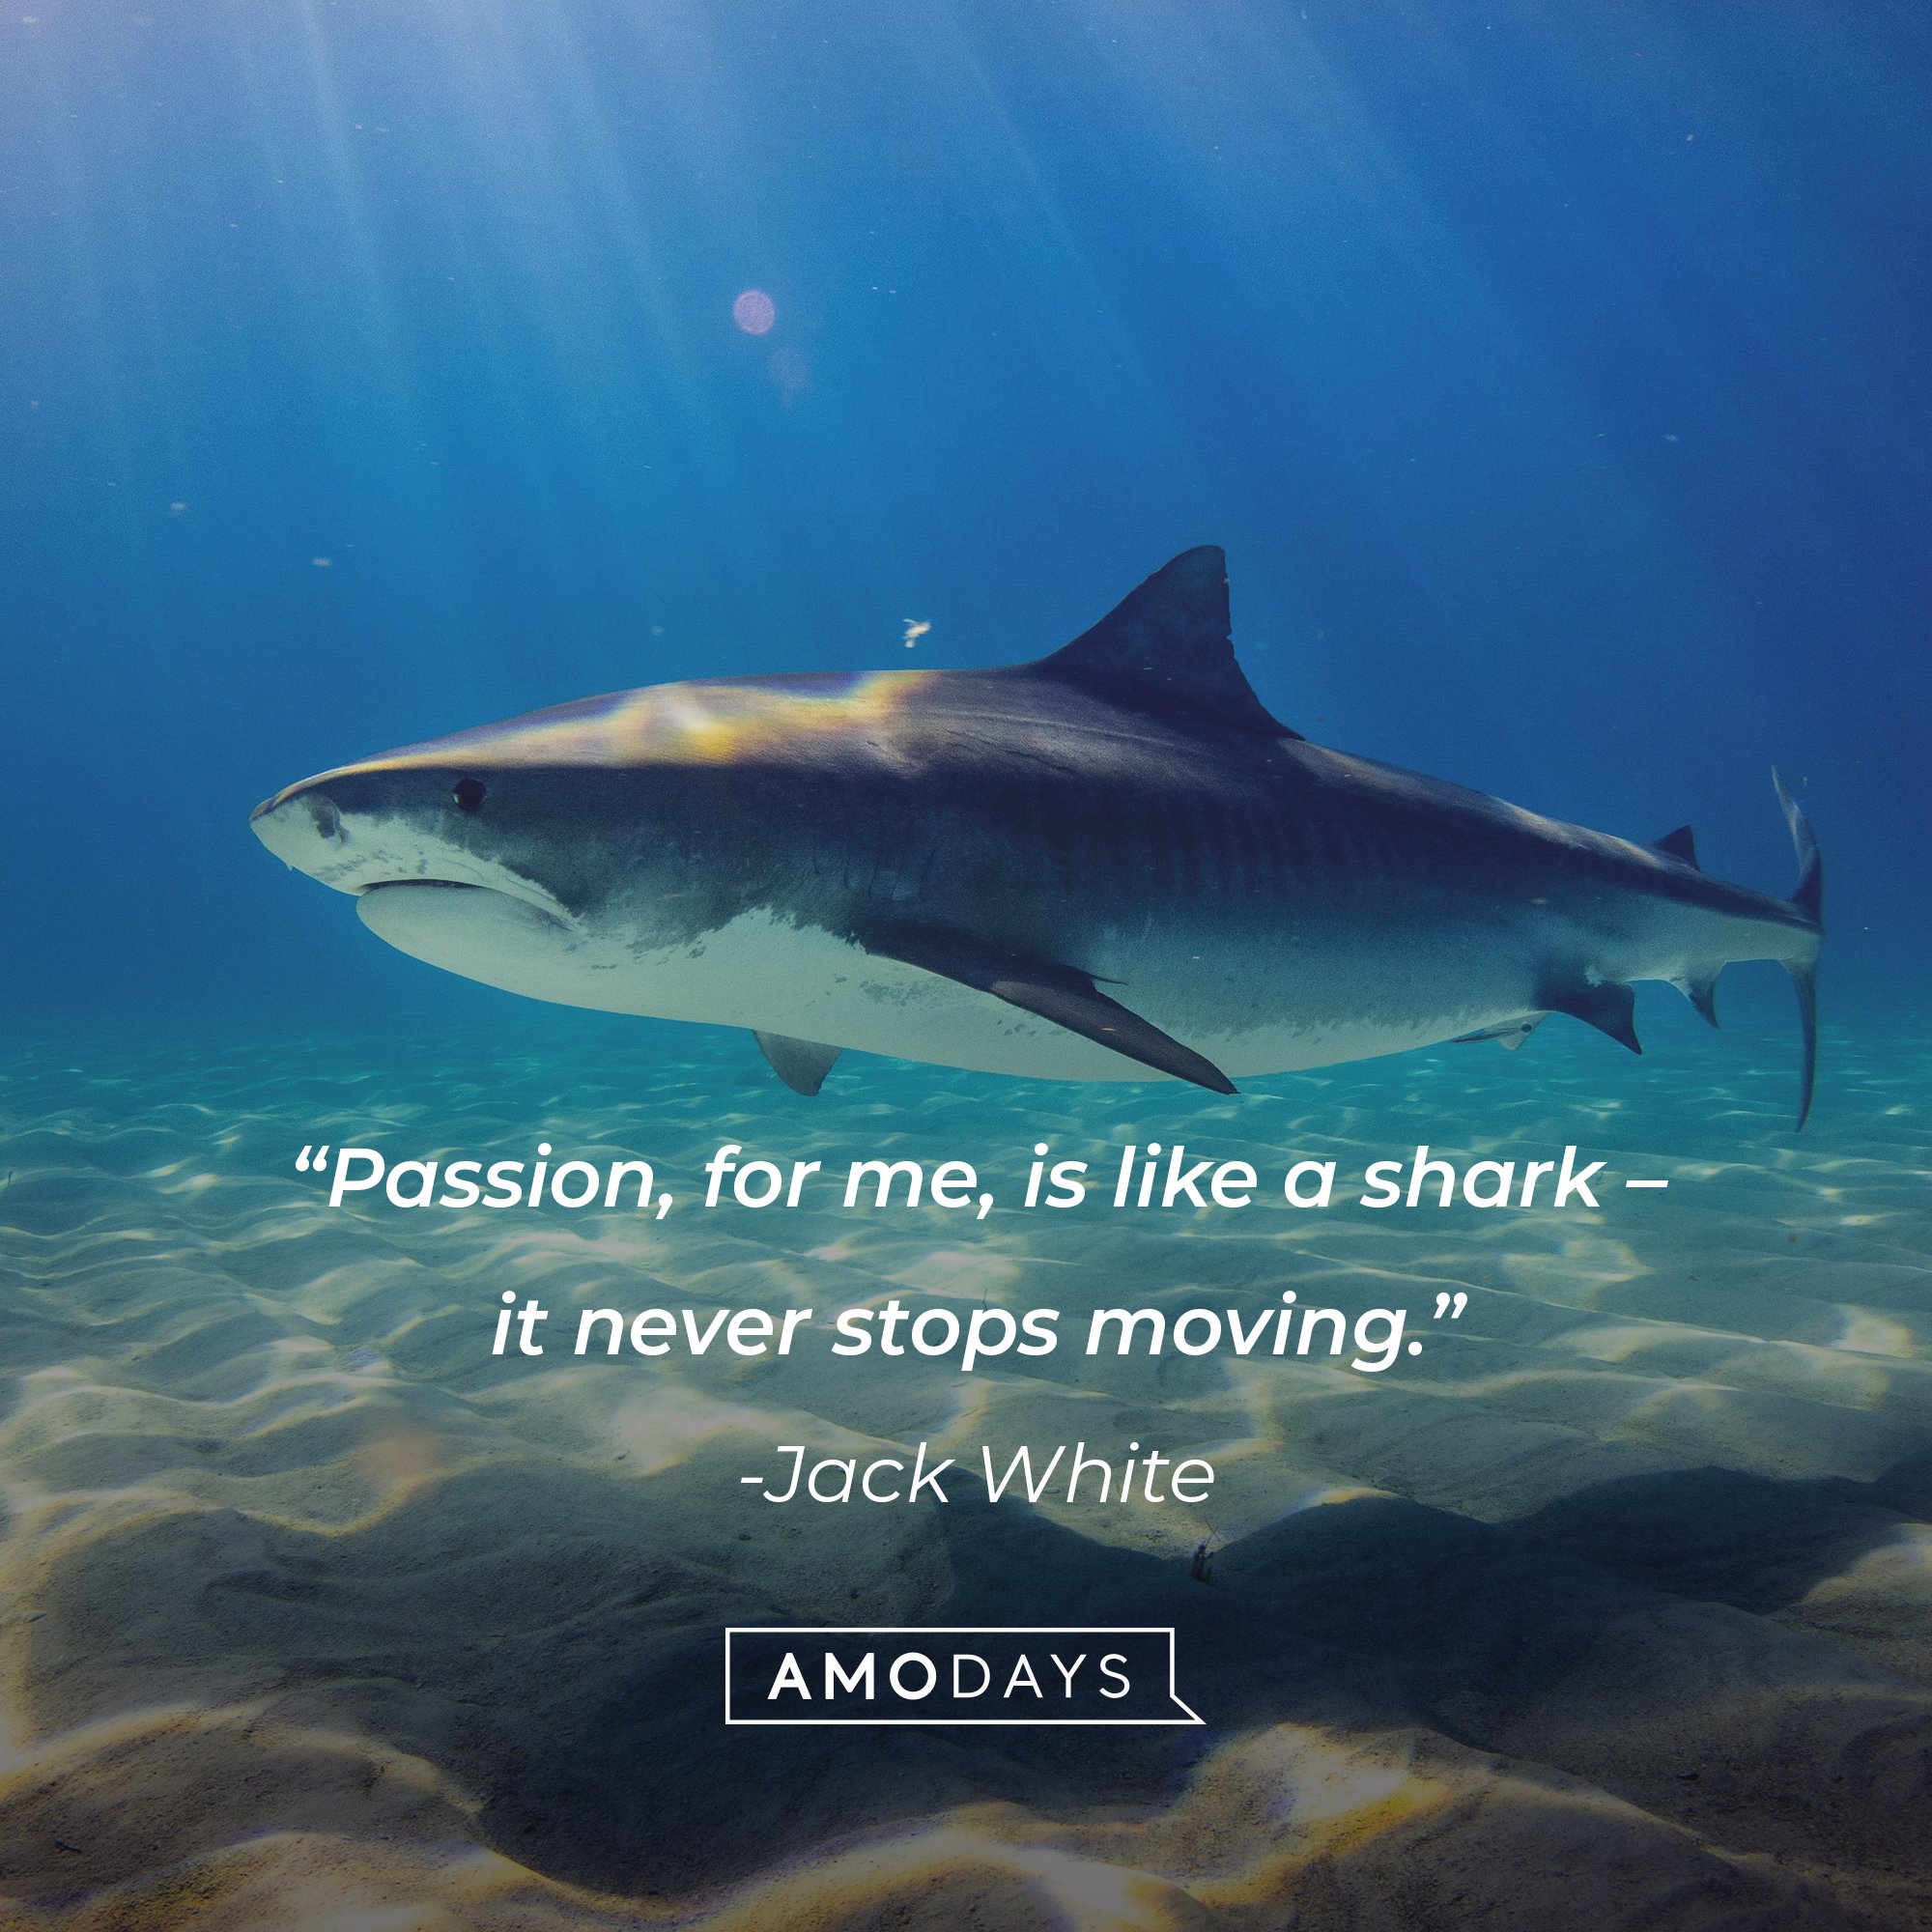 Jack White's quote: “Passion, for me, is like a shark – it never stops moving.” | Image: AmoDays